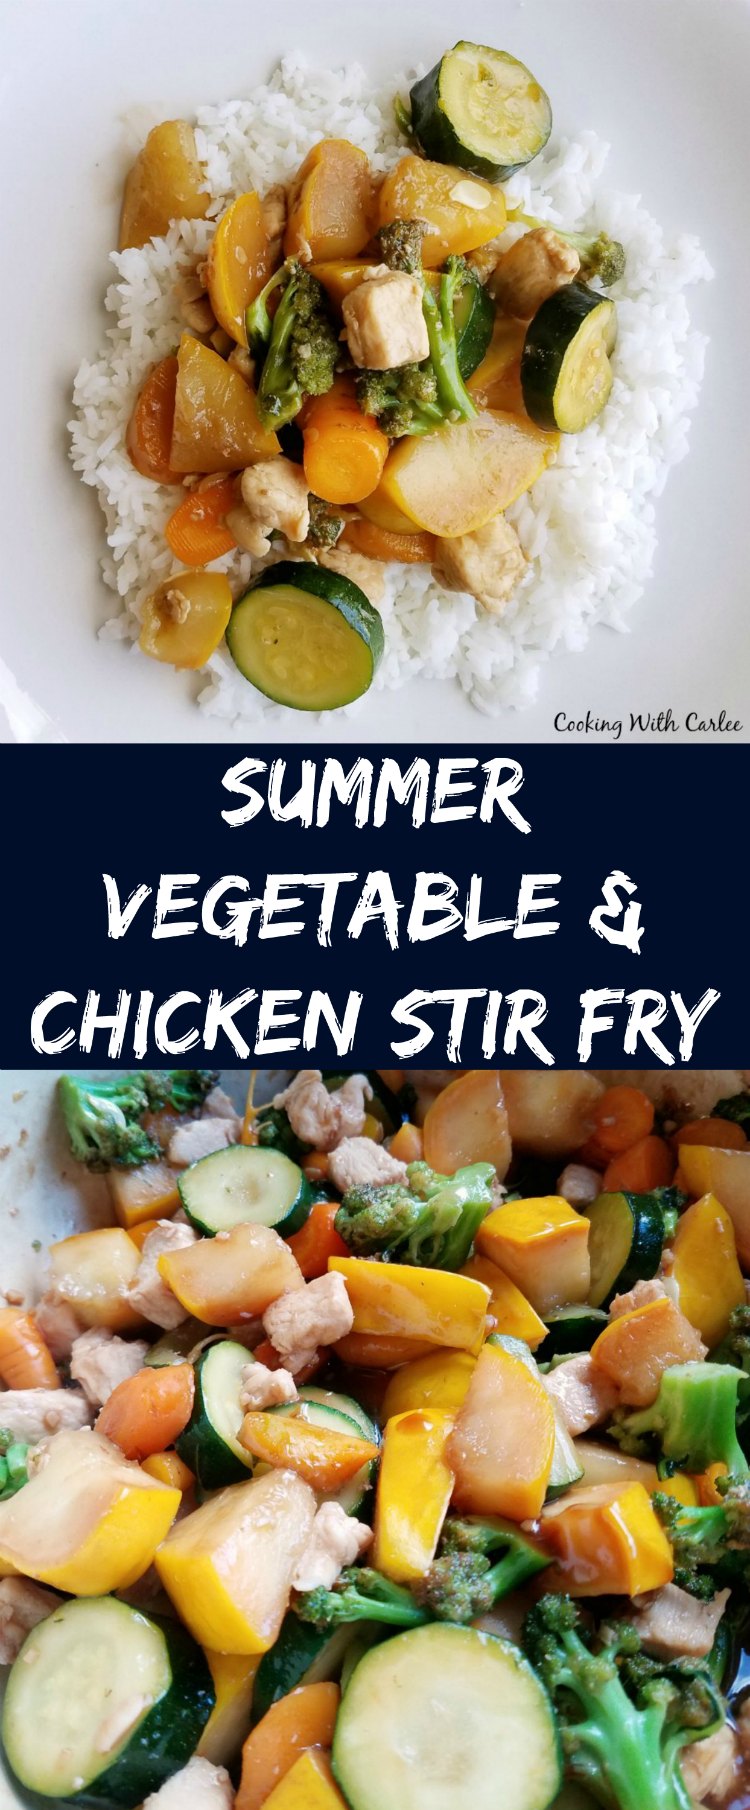 Summer vegetables and chicken are quickly cooked until tender crisp and then coated in a delicious stir fry sauce.  Dinner is ready by the time the rice is done cooking!